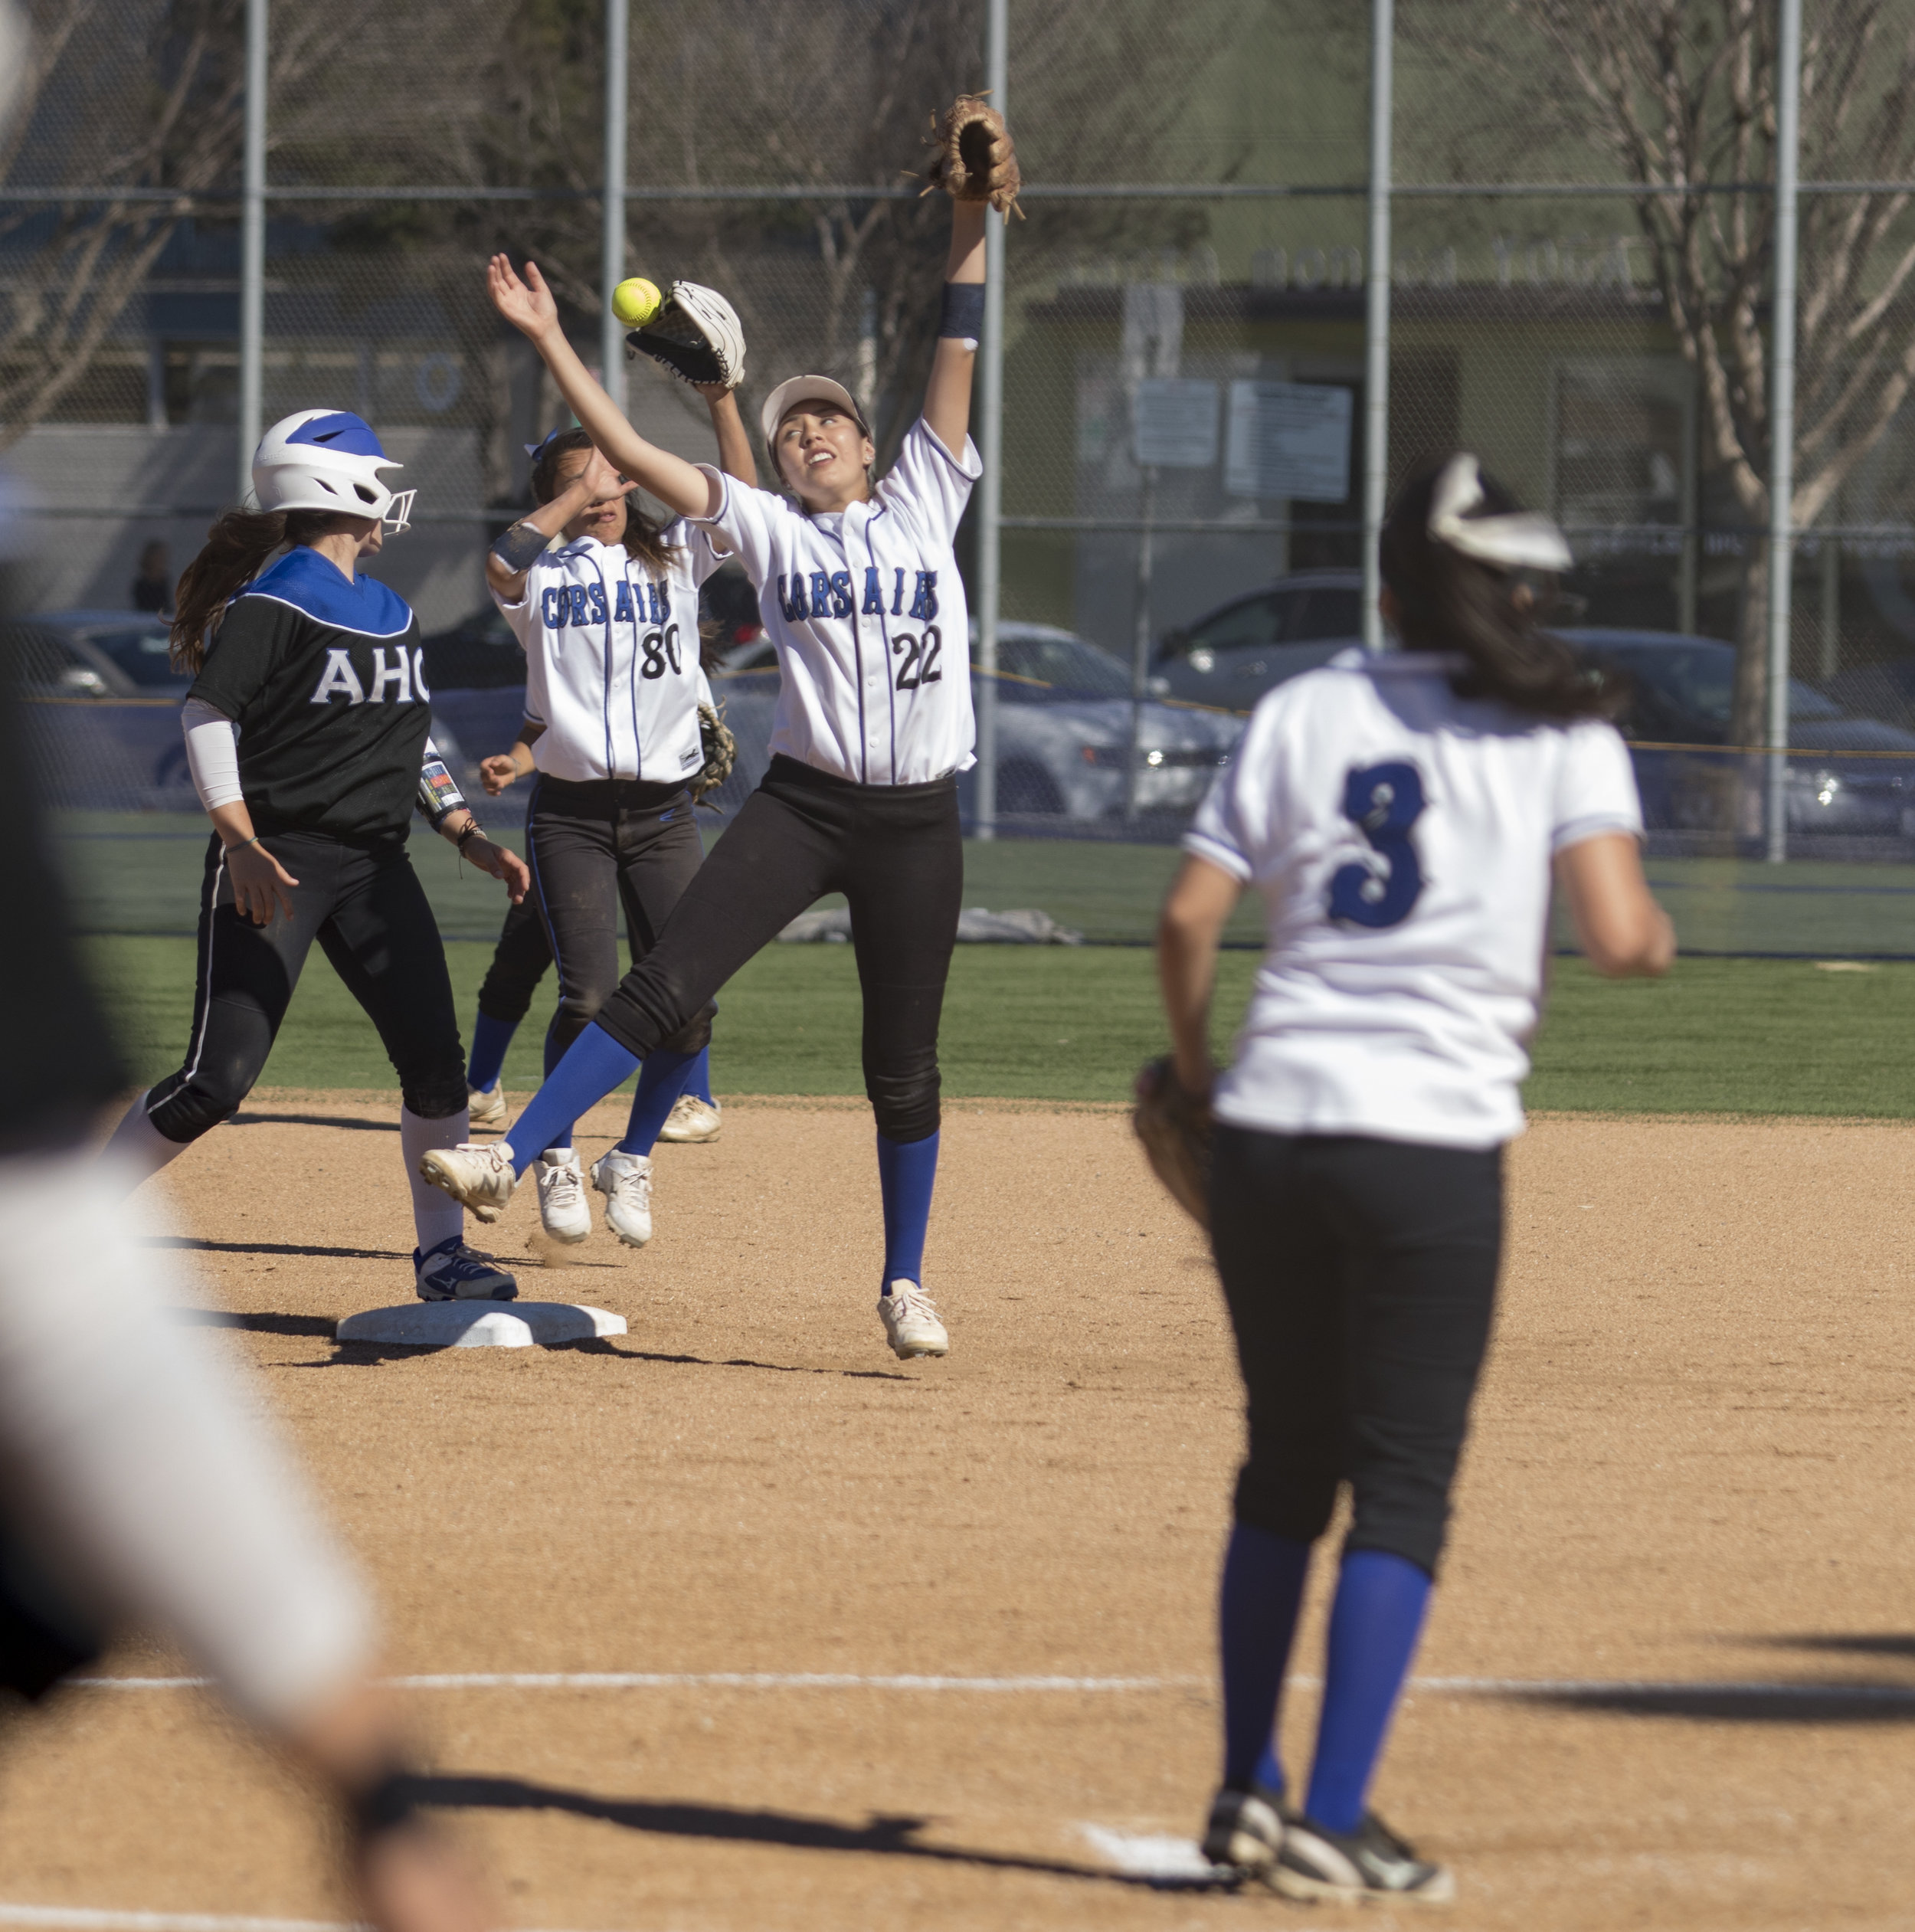  Santa Monica Corsair players jumping for the ball during Tuesday, March 27, 2018, game against the Allan Hancock Bulldogs at John Adams Middle School in Santa Monica, California. The Corsair fell 8-1 to the Bulldogs and are now 1-4 in their conferen